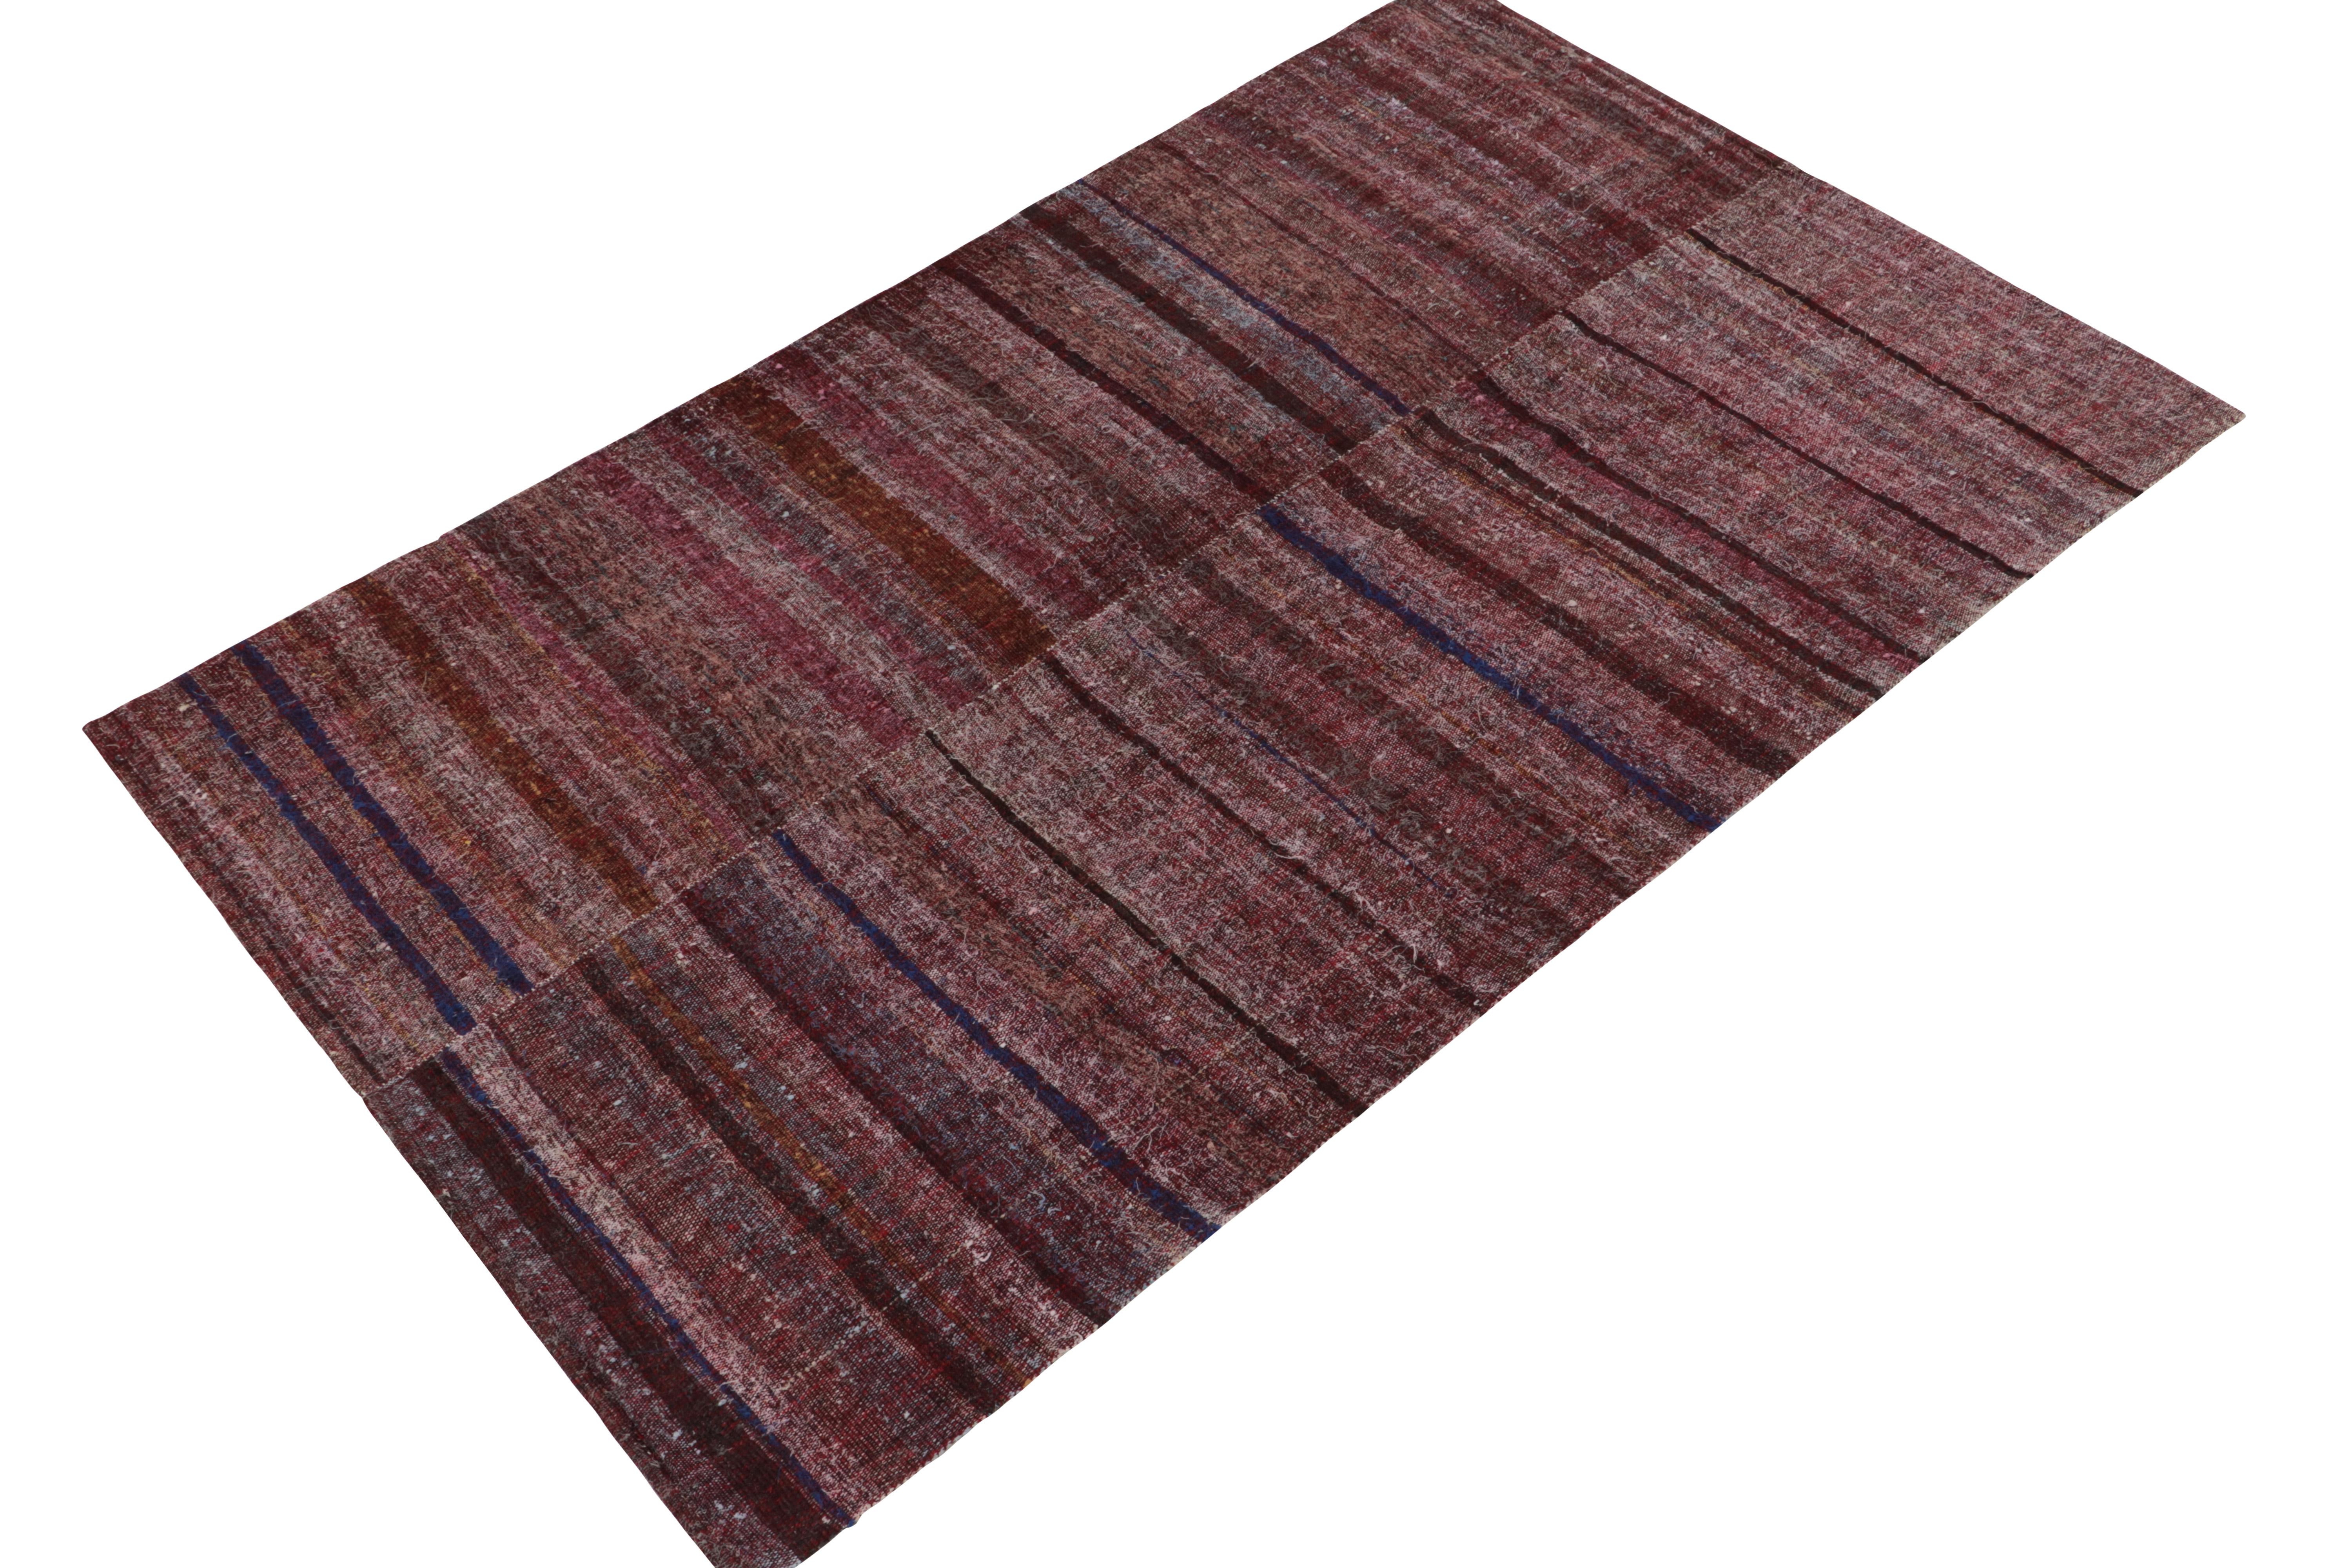 Connoting mid-century wool panel-weaving aesthetics, a 6x9 vintage kilim rug originating from Turkey circa 1950-1960. This particular design plays two distinct halves into one relishing prevailing tones of rare purple, accented with whimsical